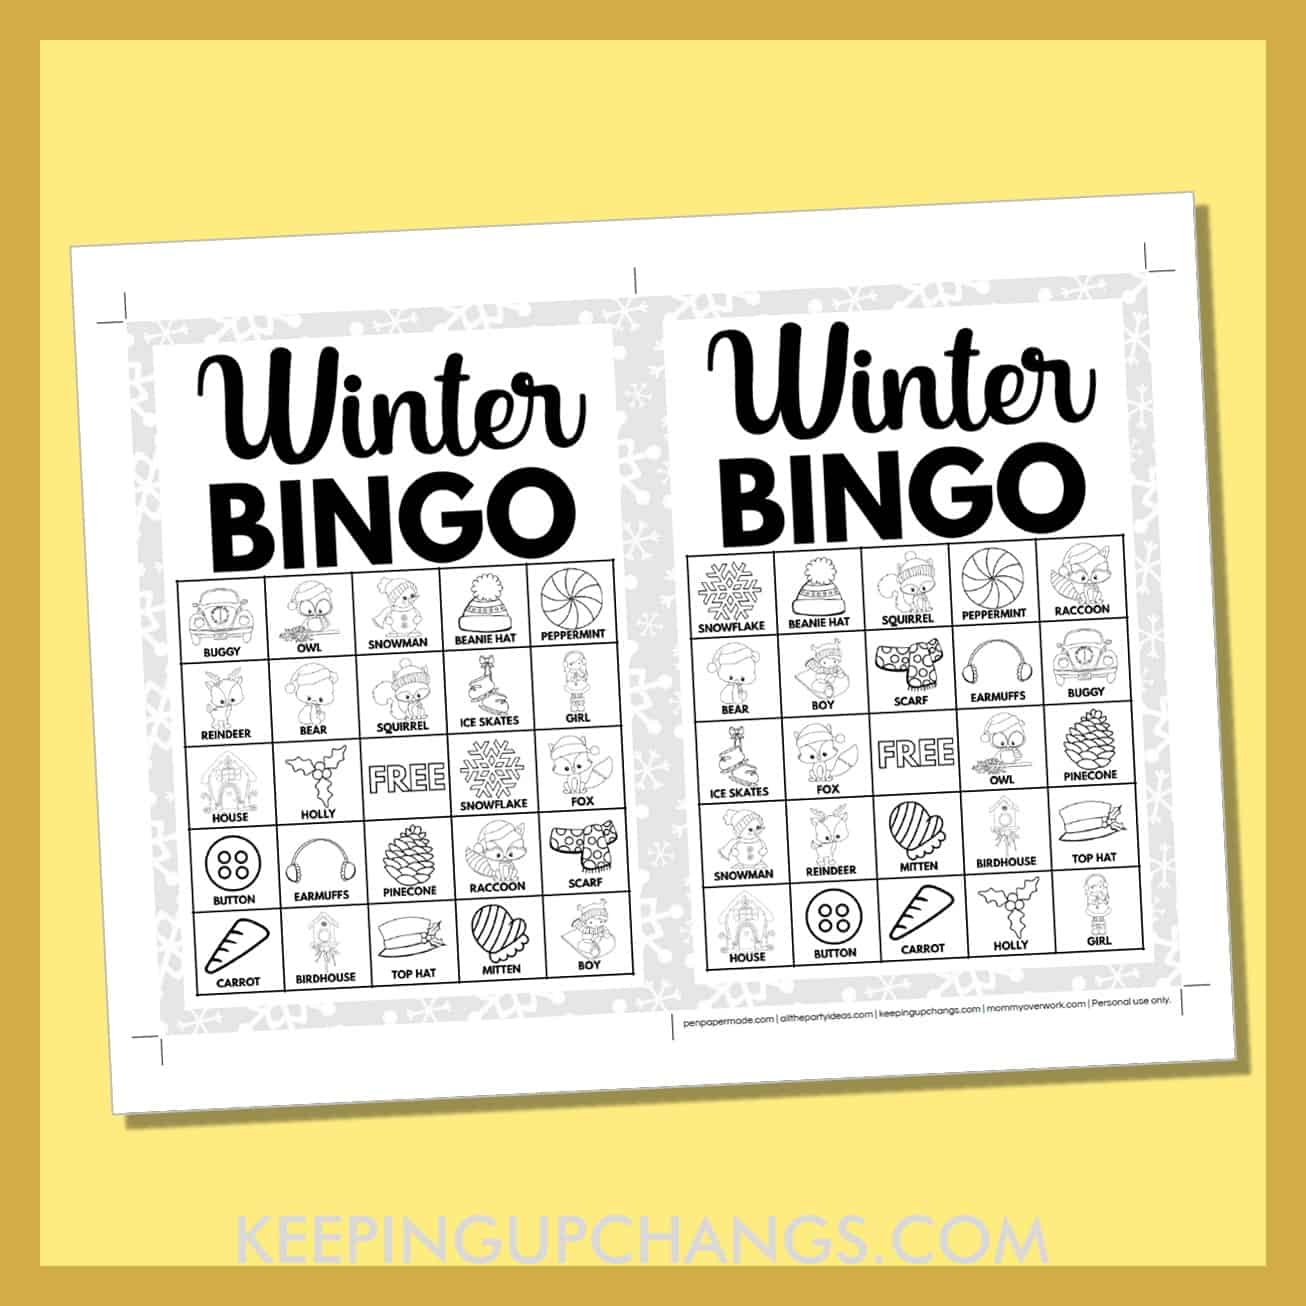 free winter bingo card 5x5 5x7 game boards with black, white images and text words.